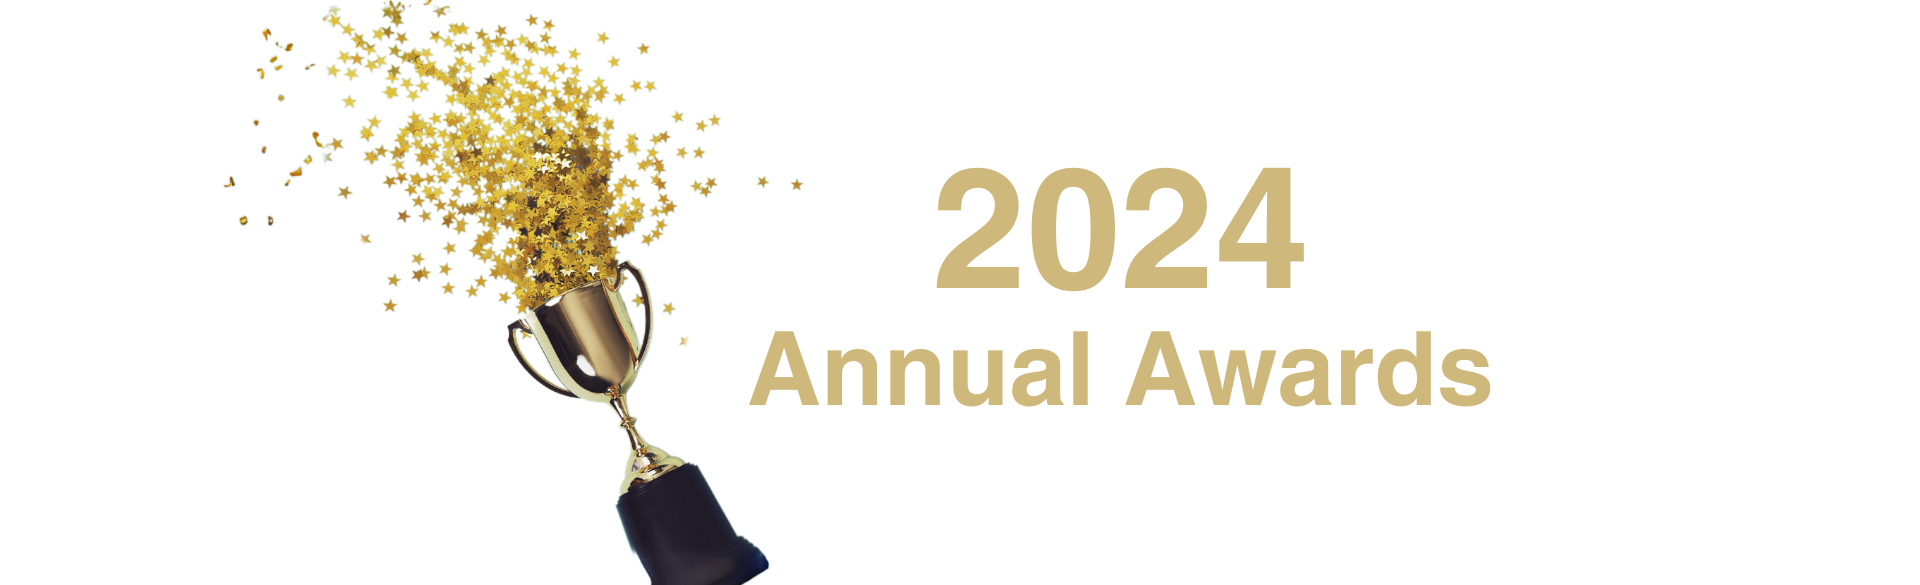 A large golden cup, with gold confetti and a black base. To the right, gold lettering spelling out 2024 Annual Awards